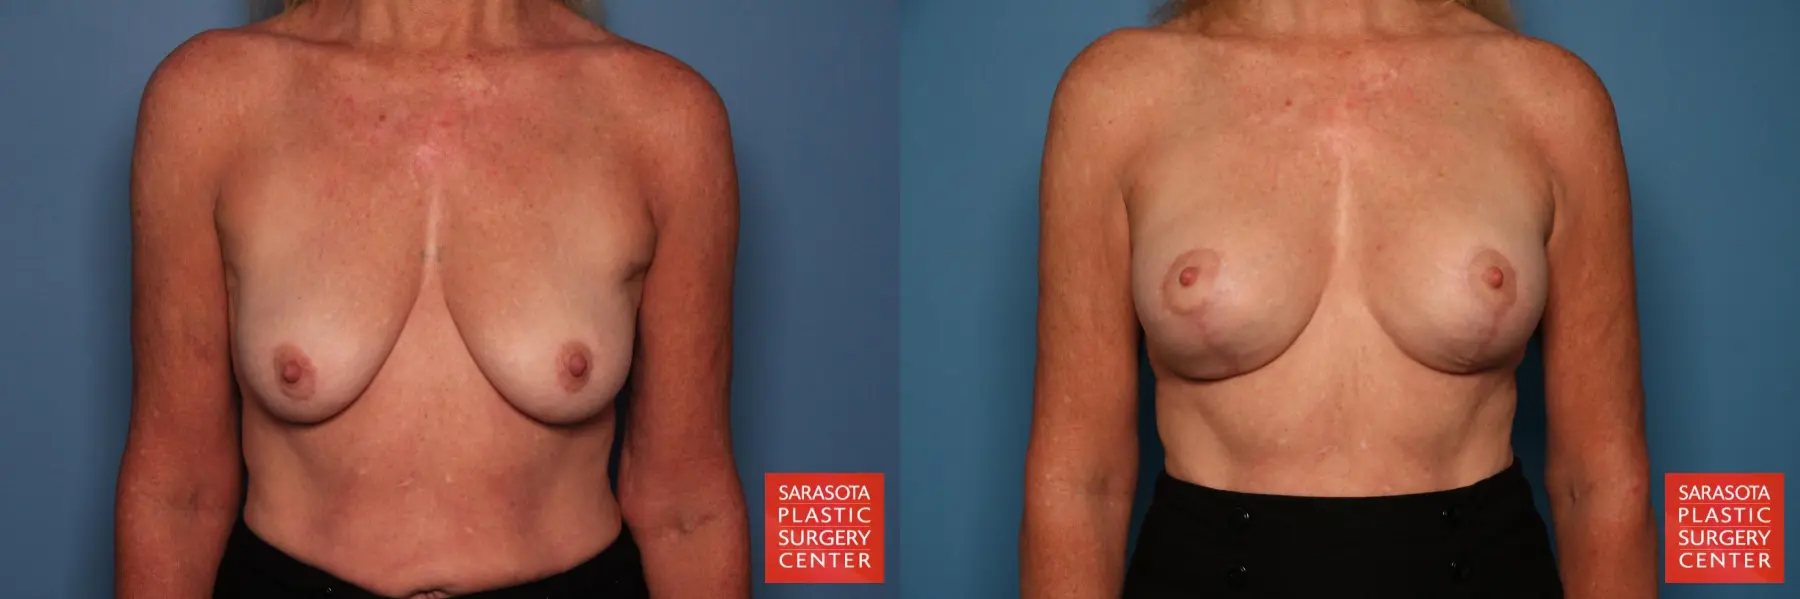 Breast Augmentation With Lift: Patient 7 - Before and After 1